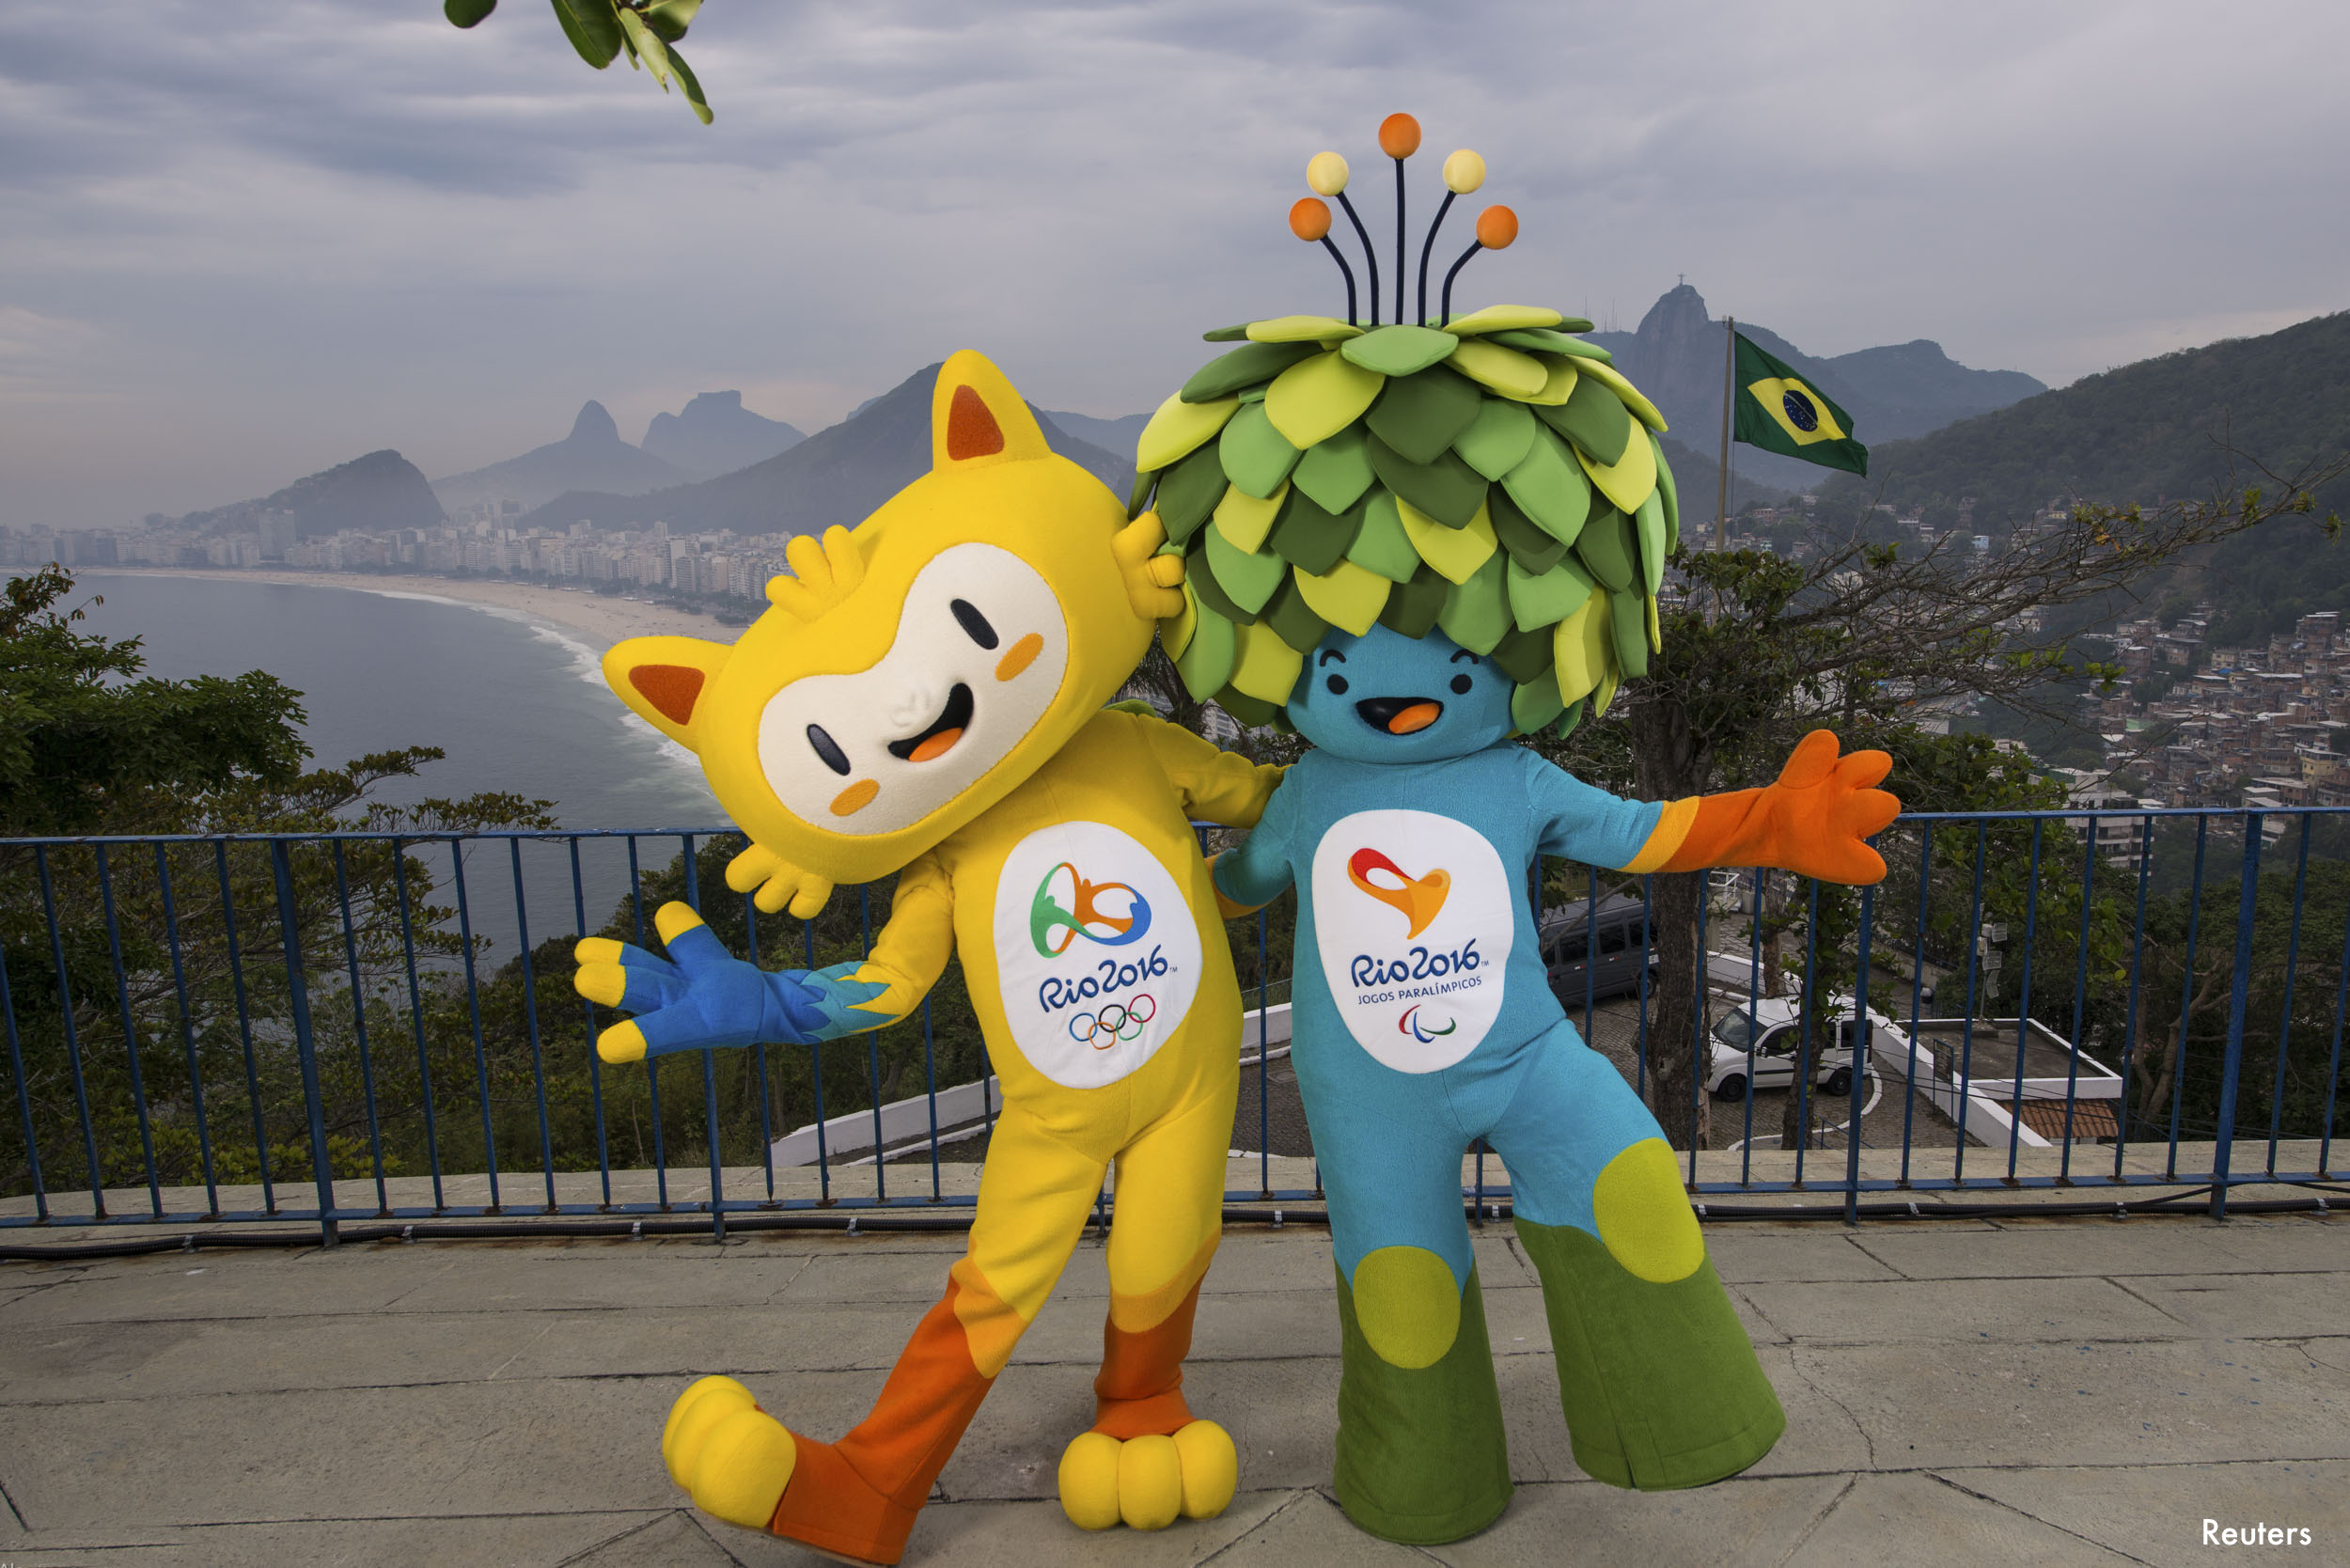 Rios 2016 Olympic Mascot Looks Like Anderson Varejao For The Win 